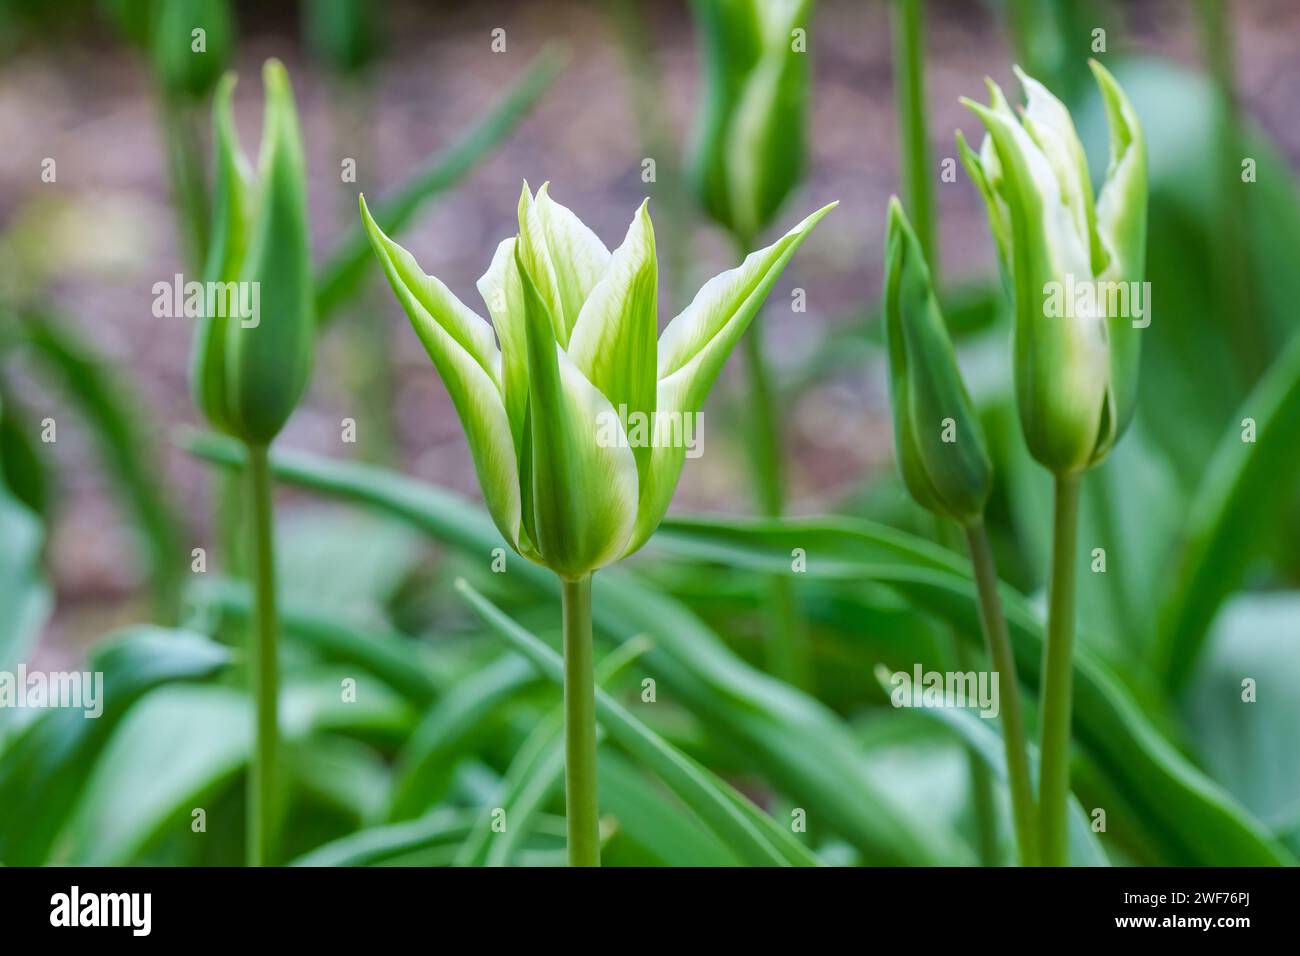 Tulip Green Star, Viridiflora Tulip, star-like blooms with green and cream striped petals. Stock Photo